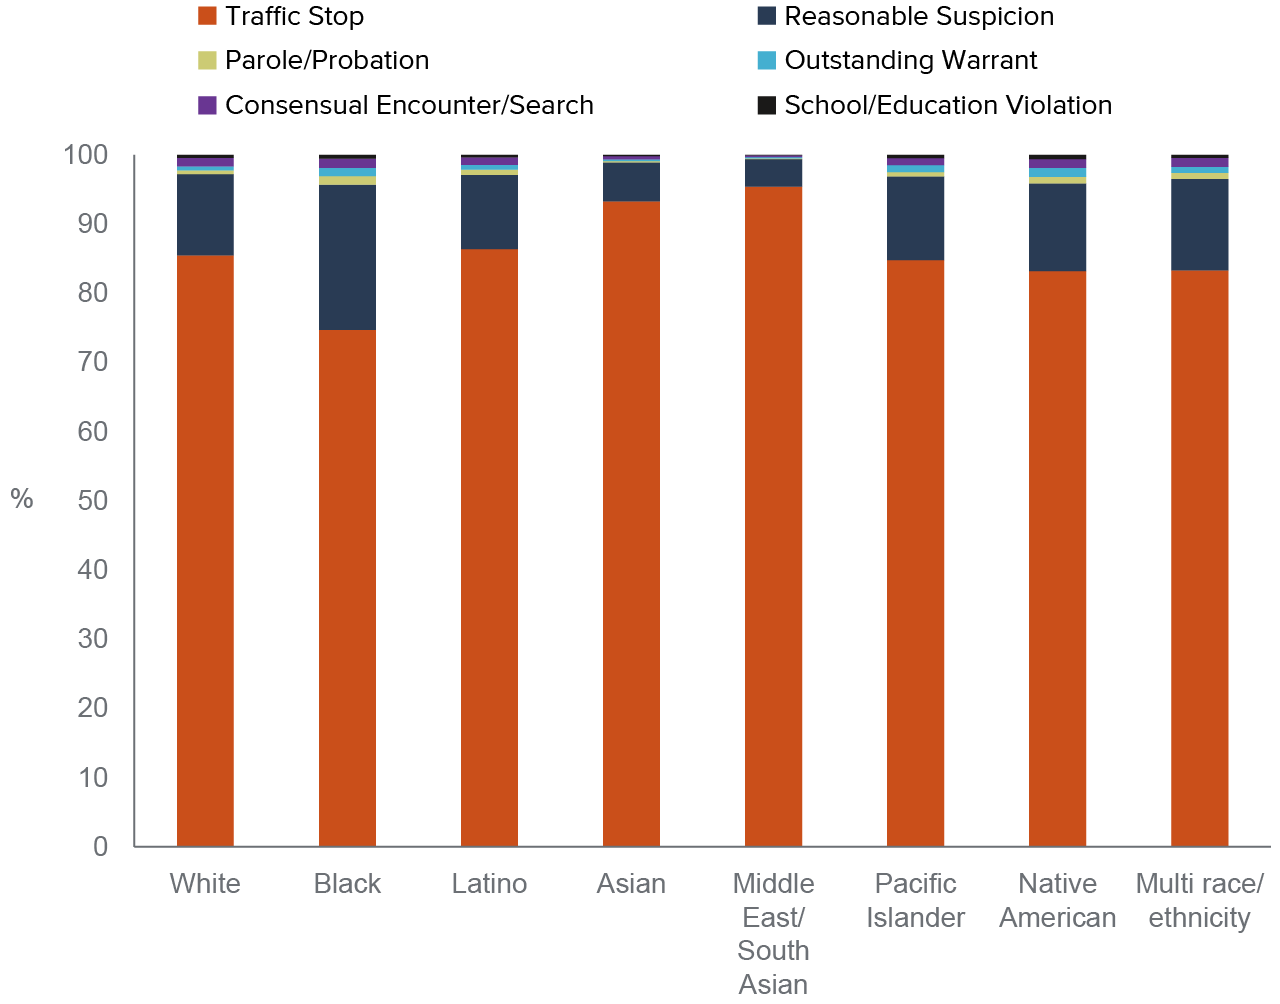 figure 2 - A greater share of Black people than white people are stopped for reasonable suspicion